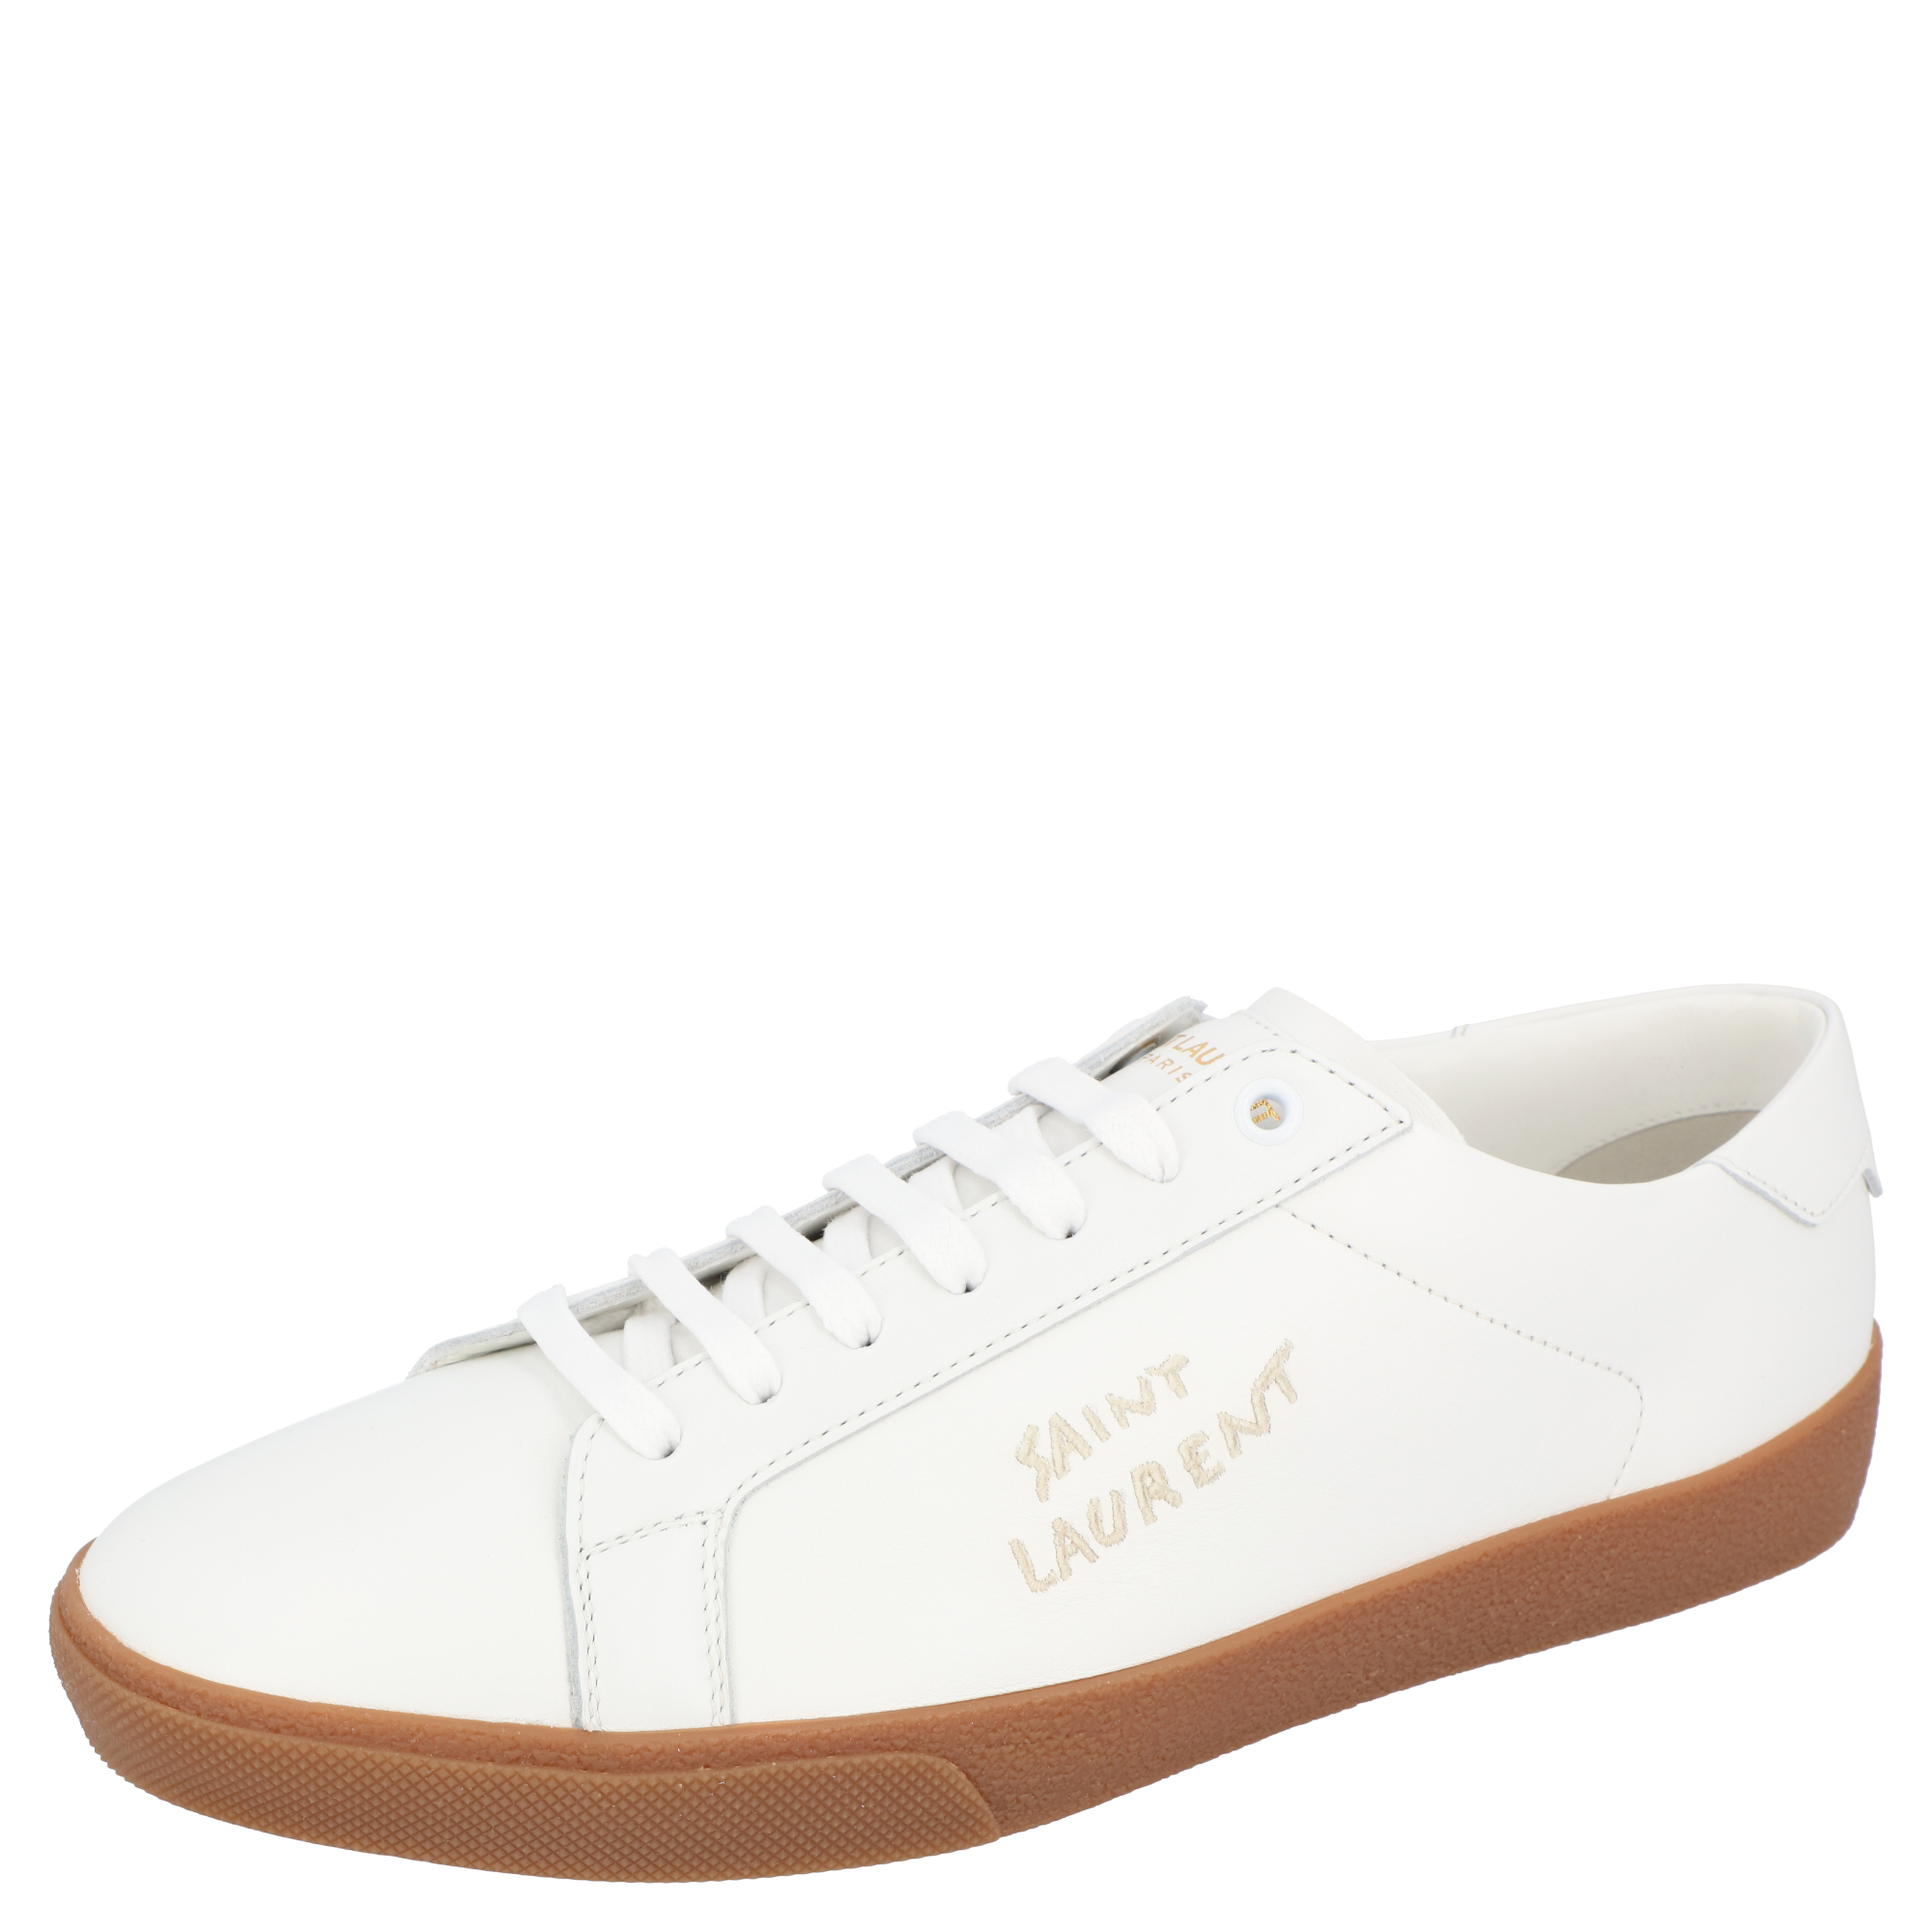 Pre-owned Saint Laurent White Leather Sl/06 Embroidered Court Classic Sneakers Size Eu 42.5